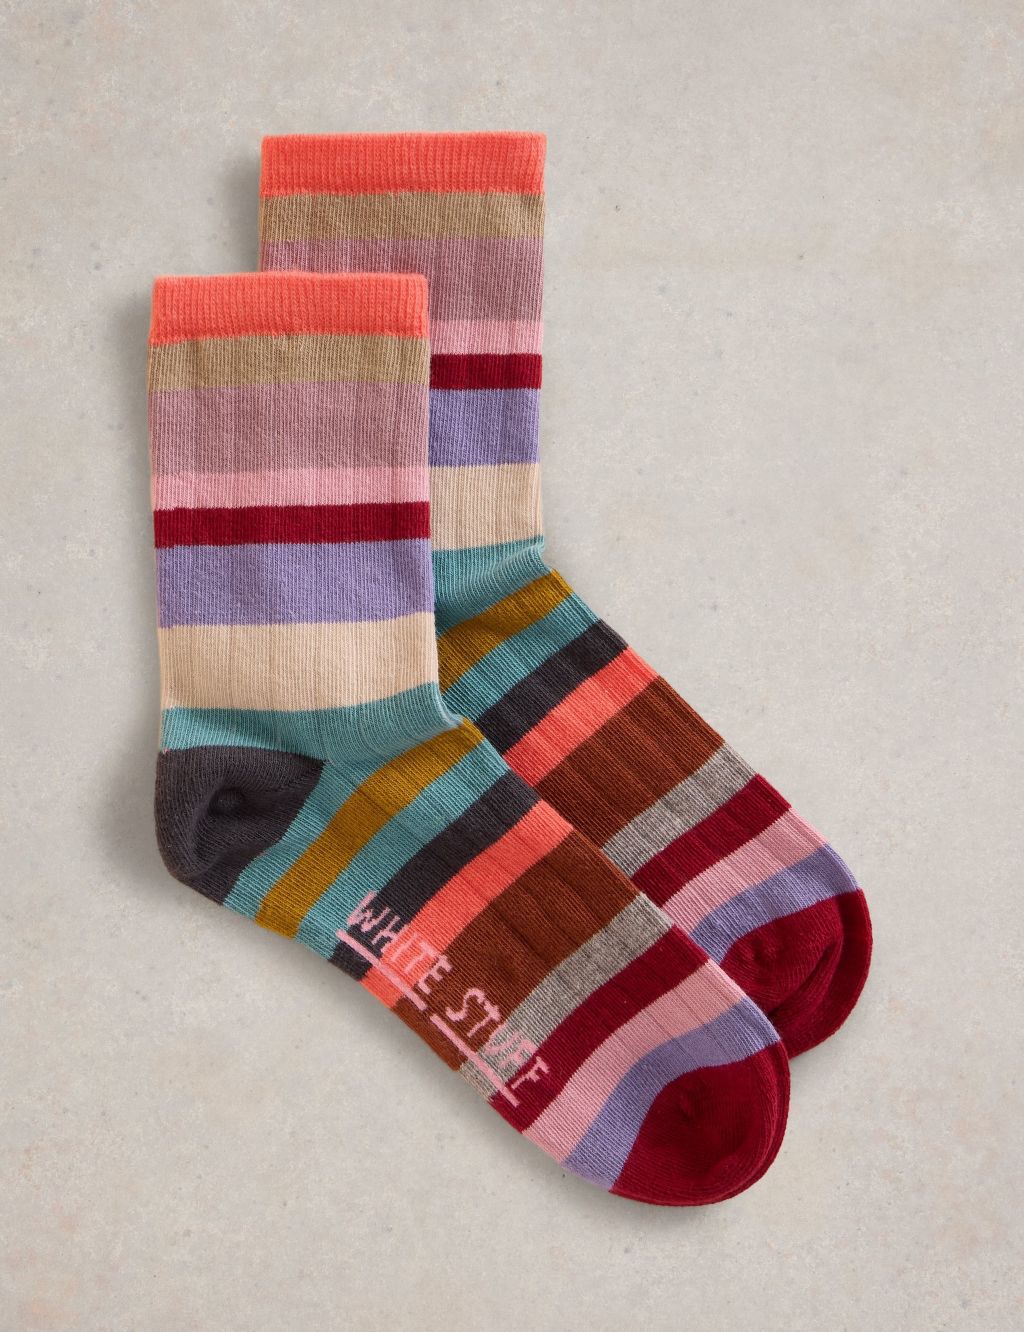 Cotton Rich Striped Ankle High Socks